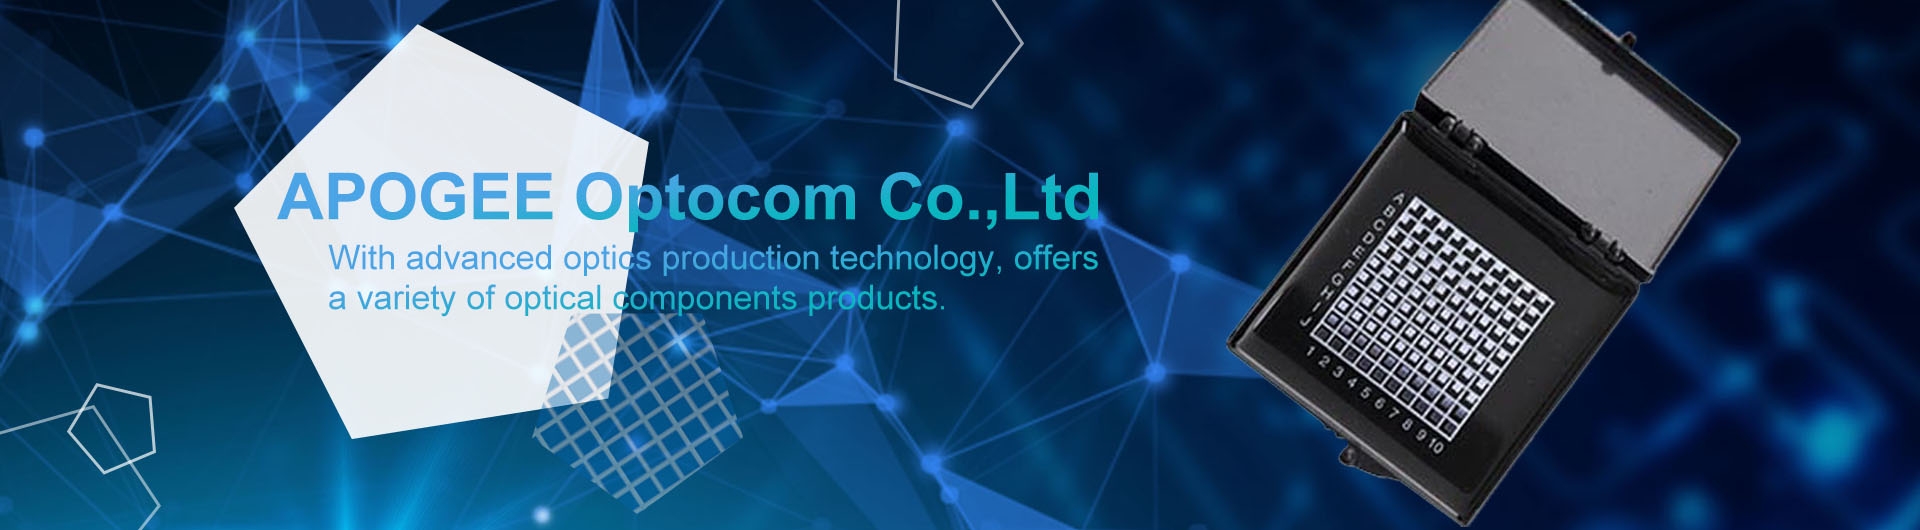 APOGEE Optocom Co.,Ltd with advanced optics production technology, offers a variety of optical components products.